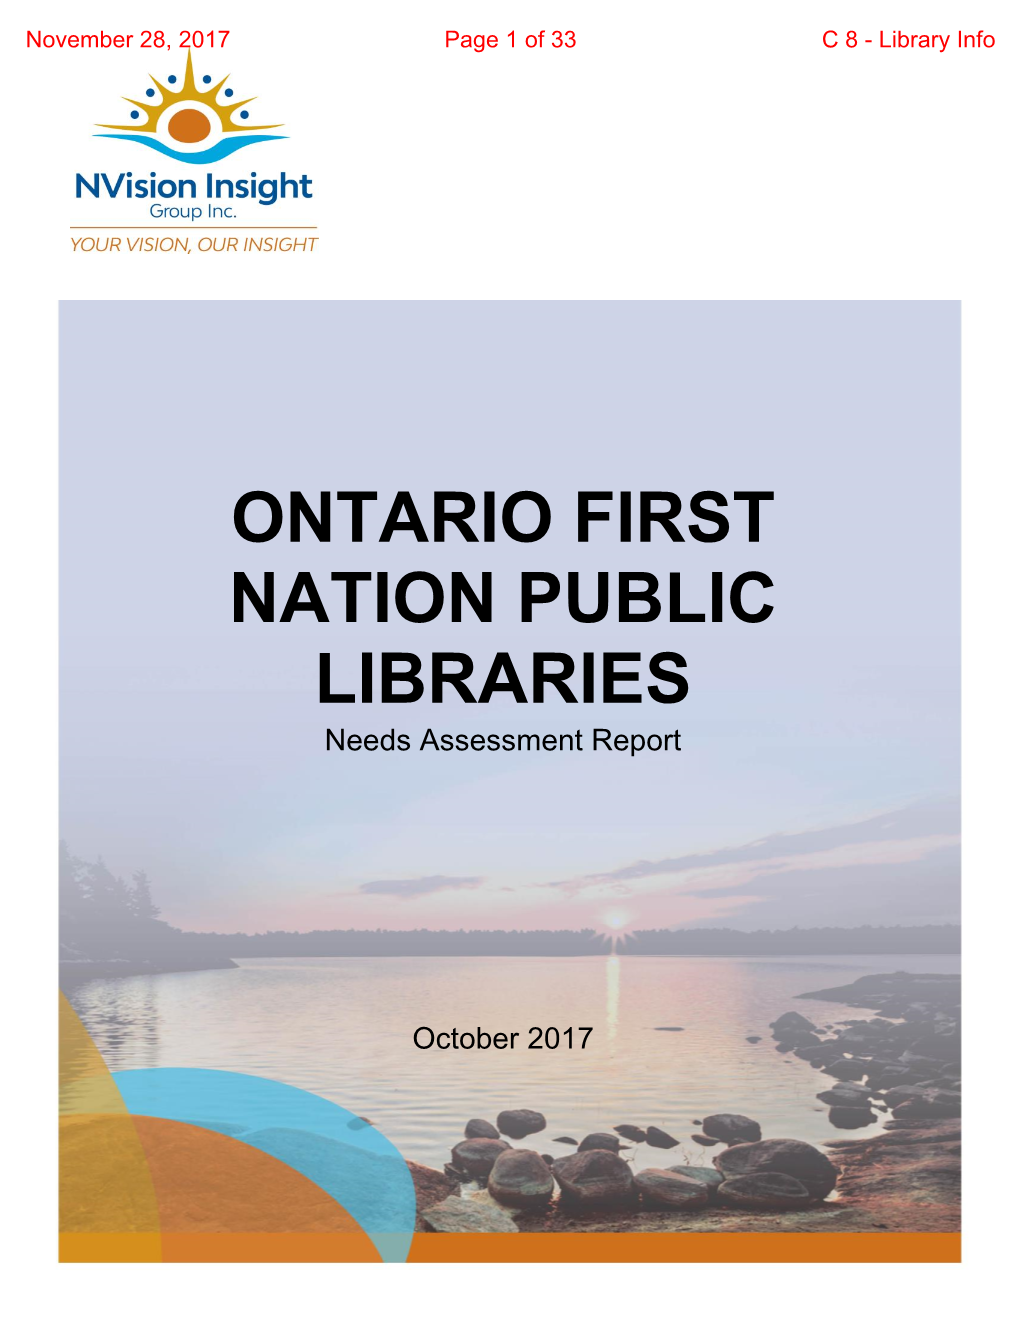 Ontario First Nation Public Libraries Need Assessment Report